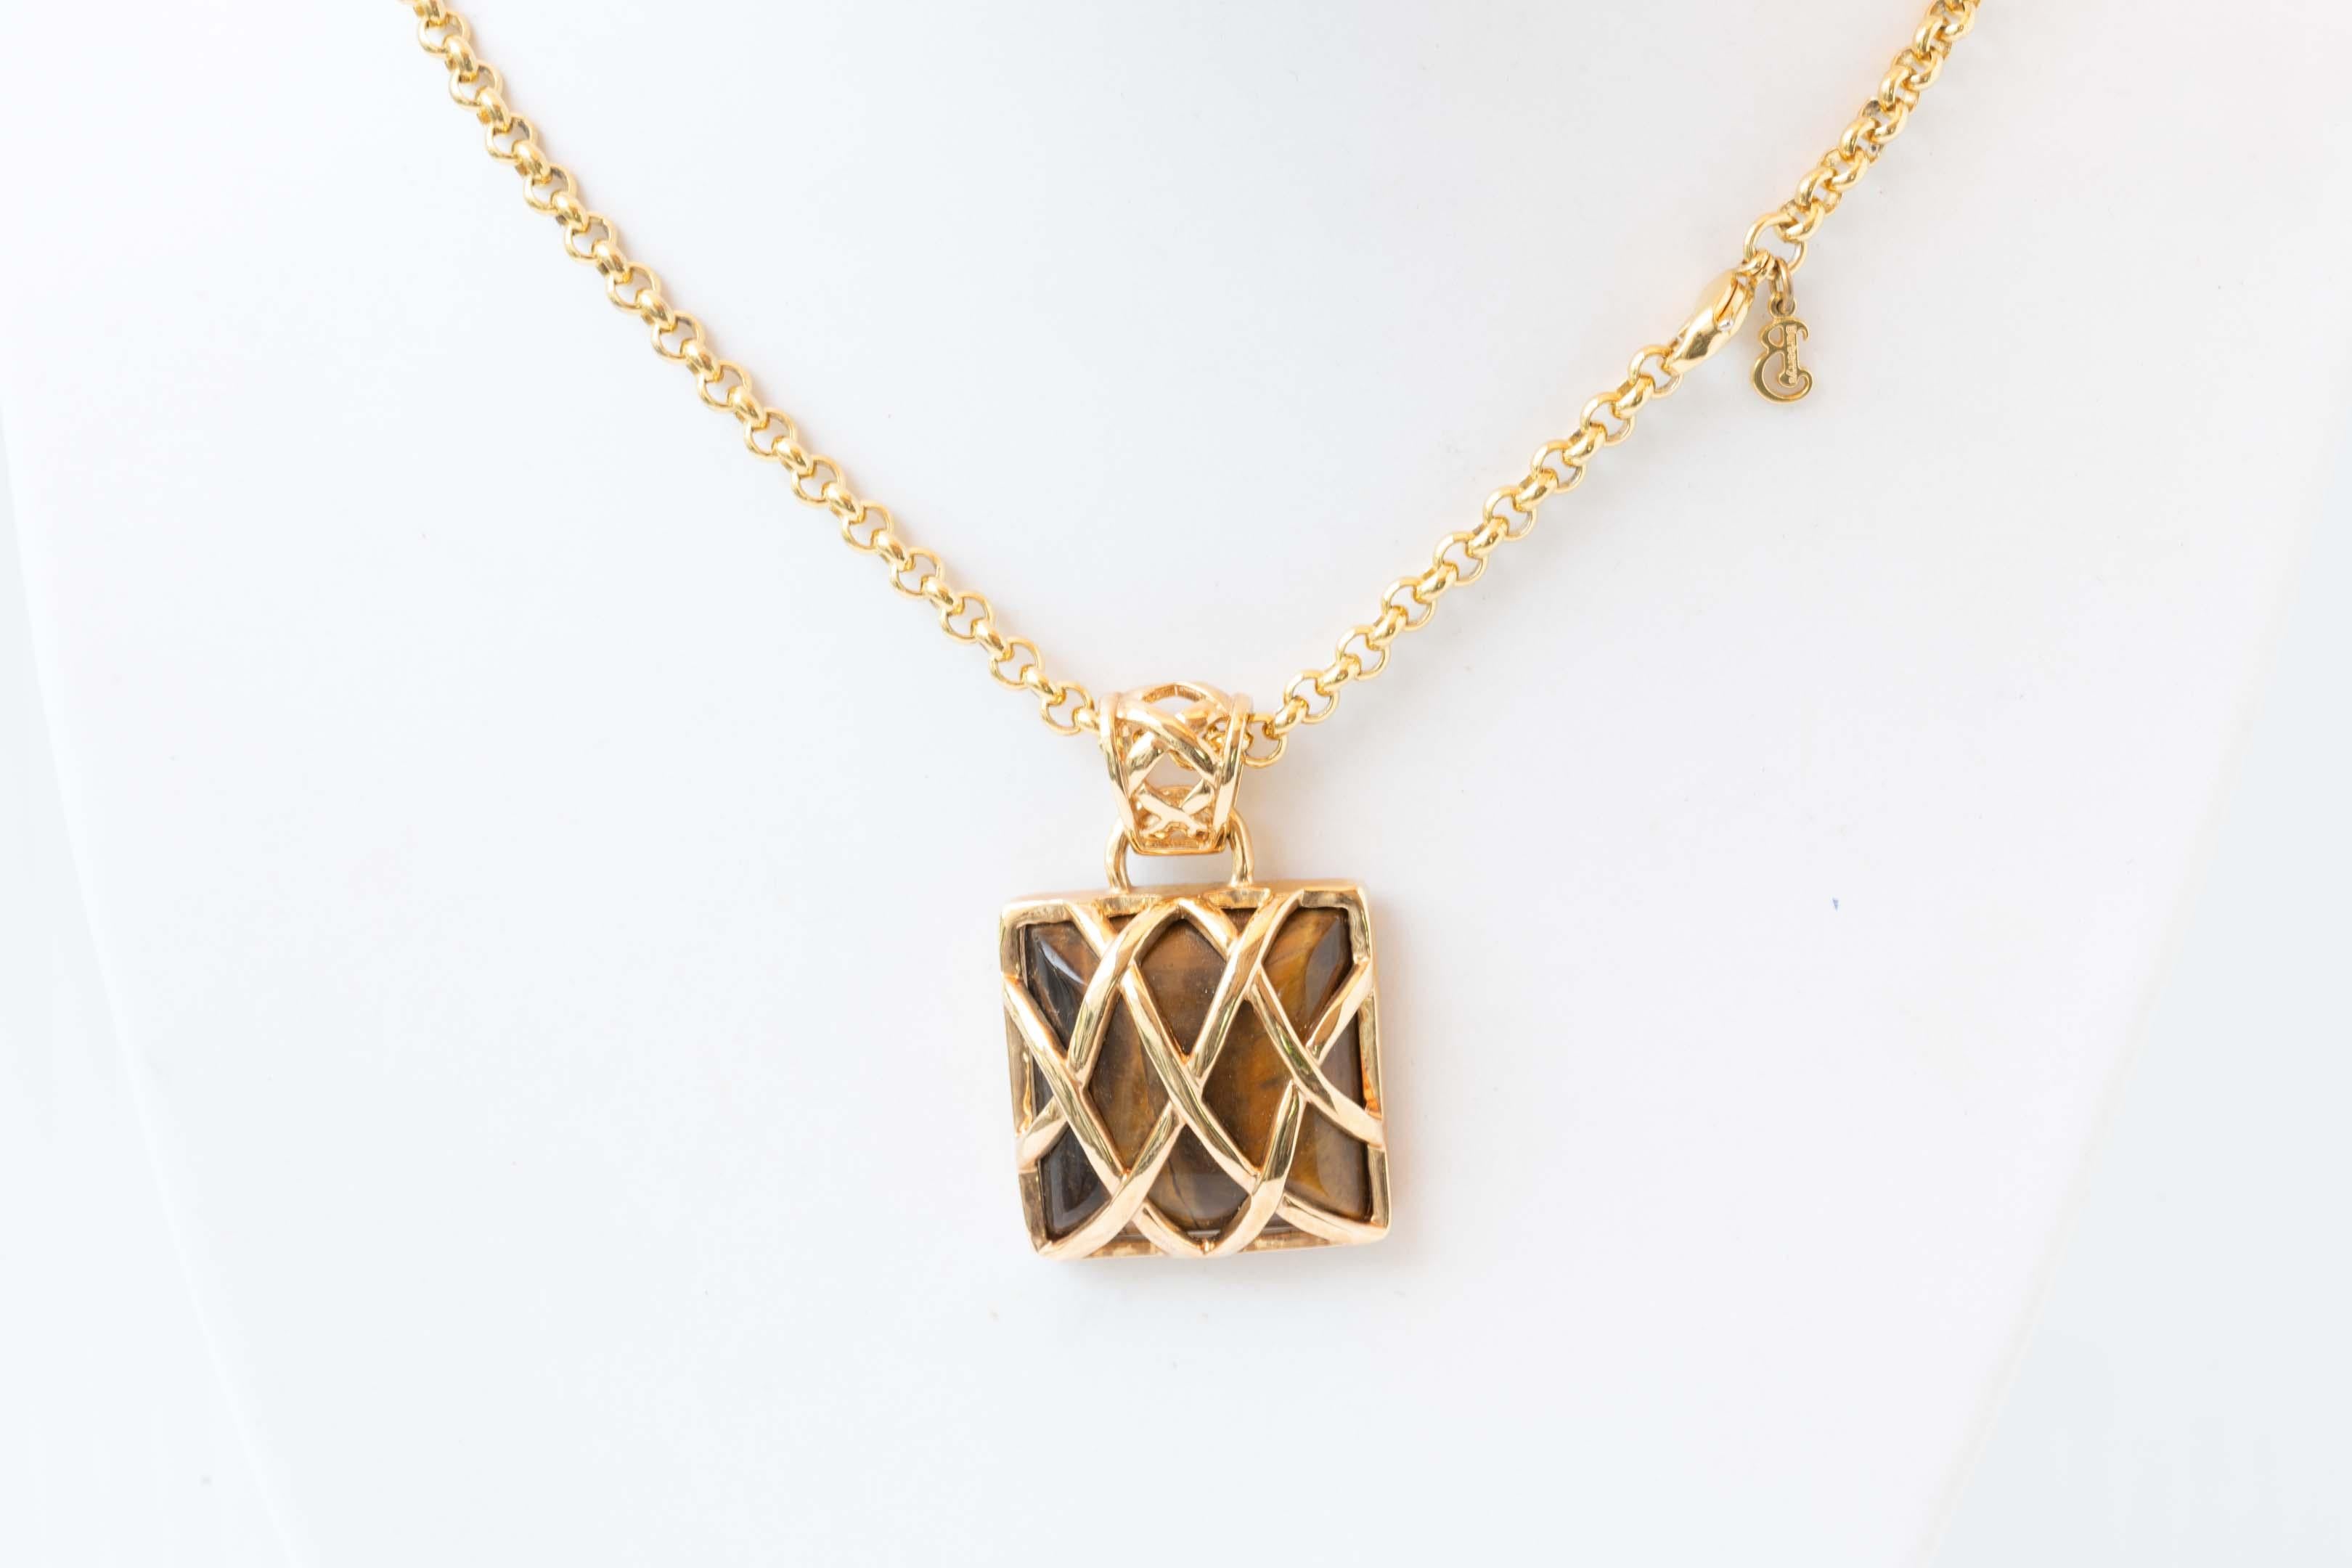 Burberry of London gold plated chain pendant with tiger eye gemstone and Burberry symbol chain. Measures 19 inches long and the pendant measures 1.2 inches long. Preowned, in excellent condition no box.